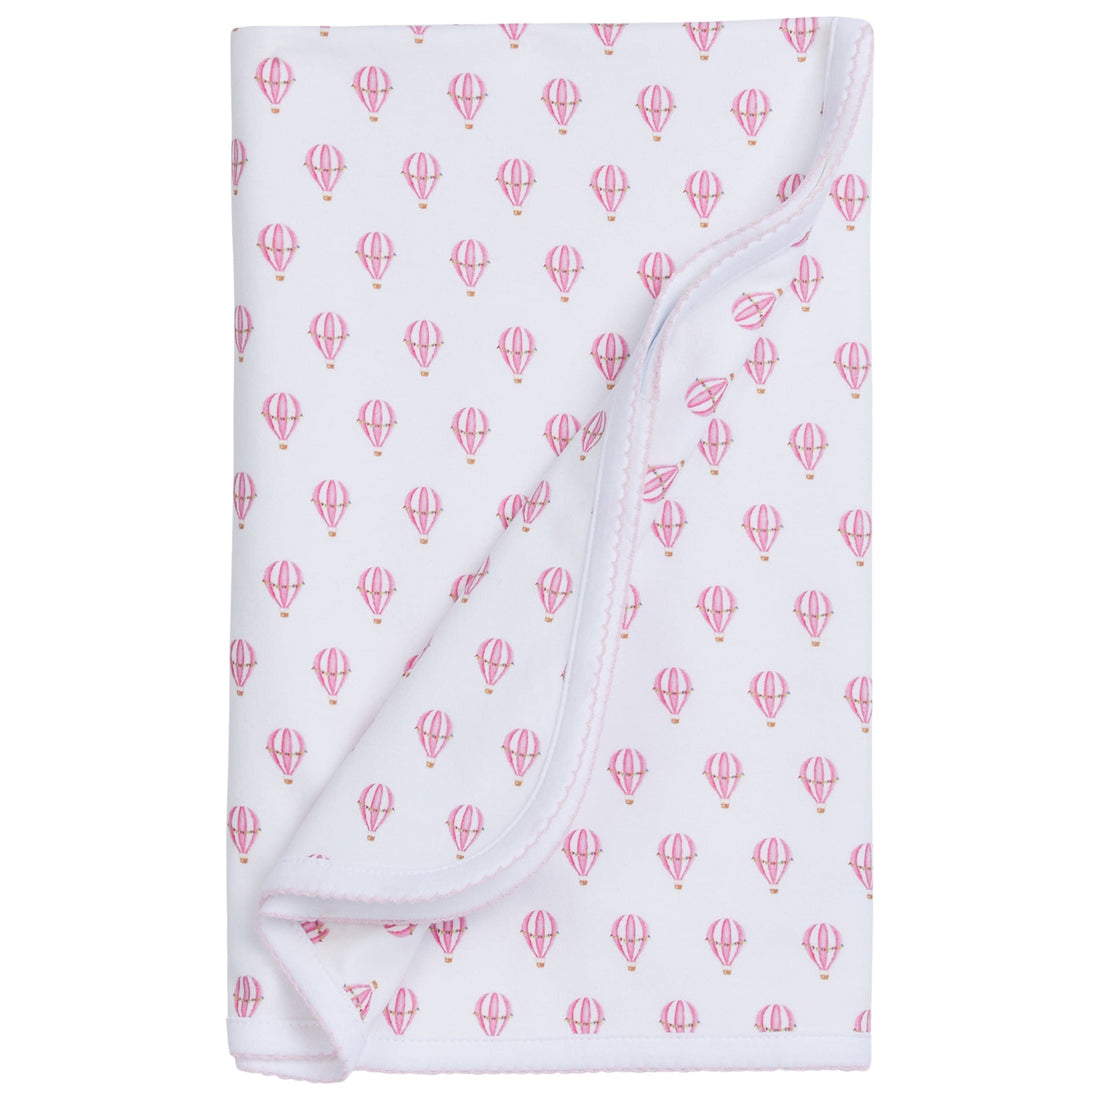 classic childrens clothing girls pink hot air balloon blanket